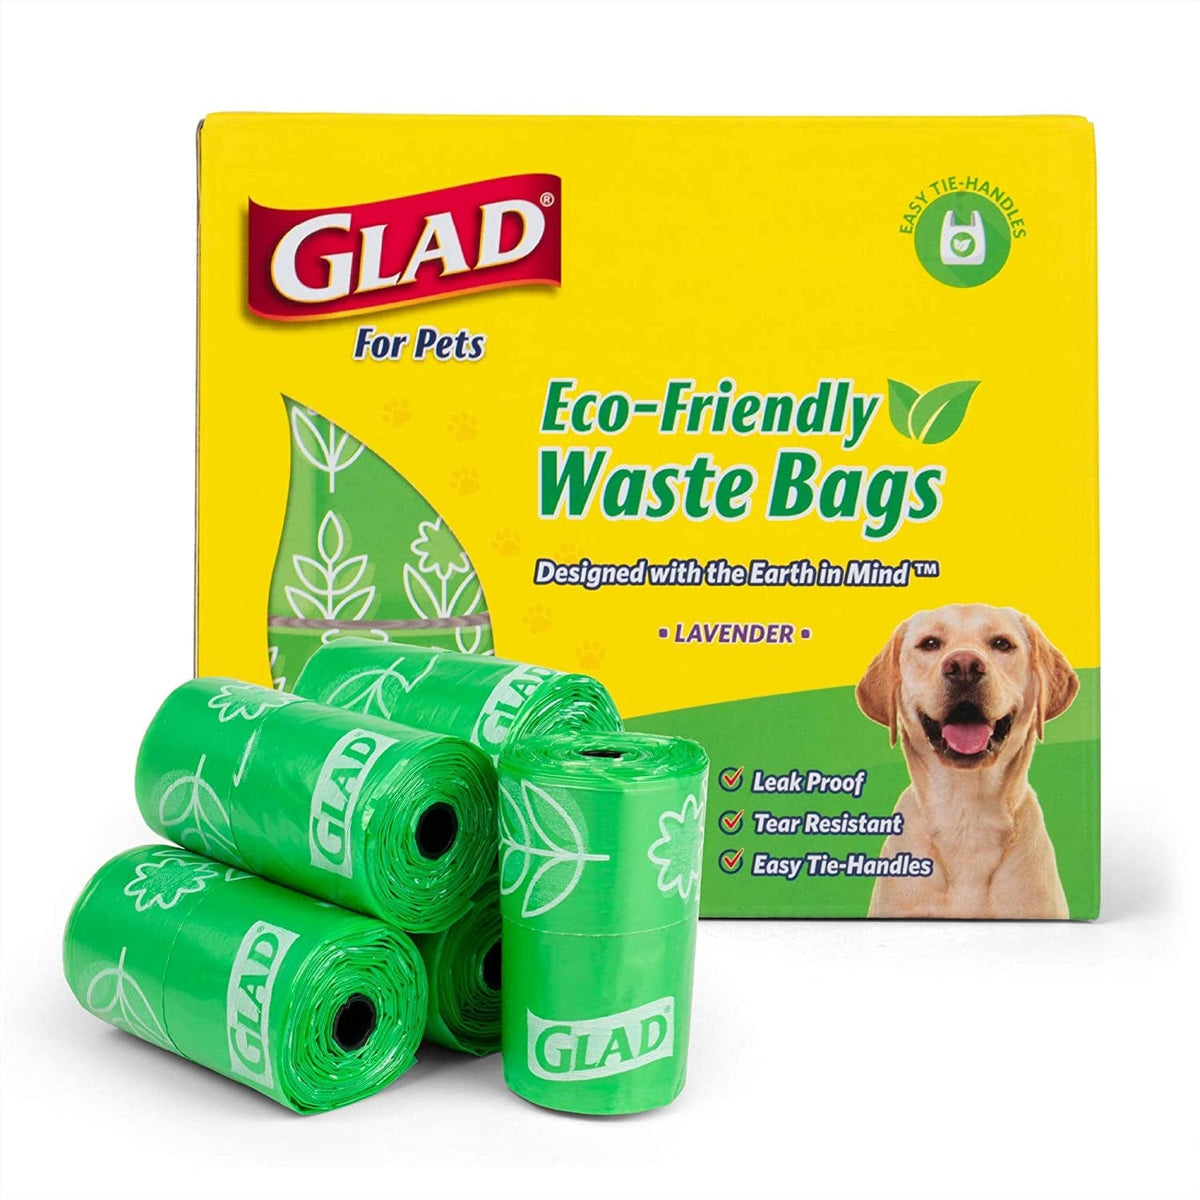 Glad Eco Friendly Dog Waste Bags | 24 Rolls of Lavender Scented Dog Waste Bags, 360 Bags in Total | Dog Waste Bags for All Dogs, Leak Proof and Strong Dog Poop Bags, Green, 360 Count